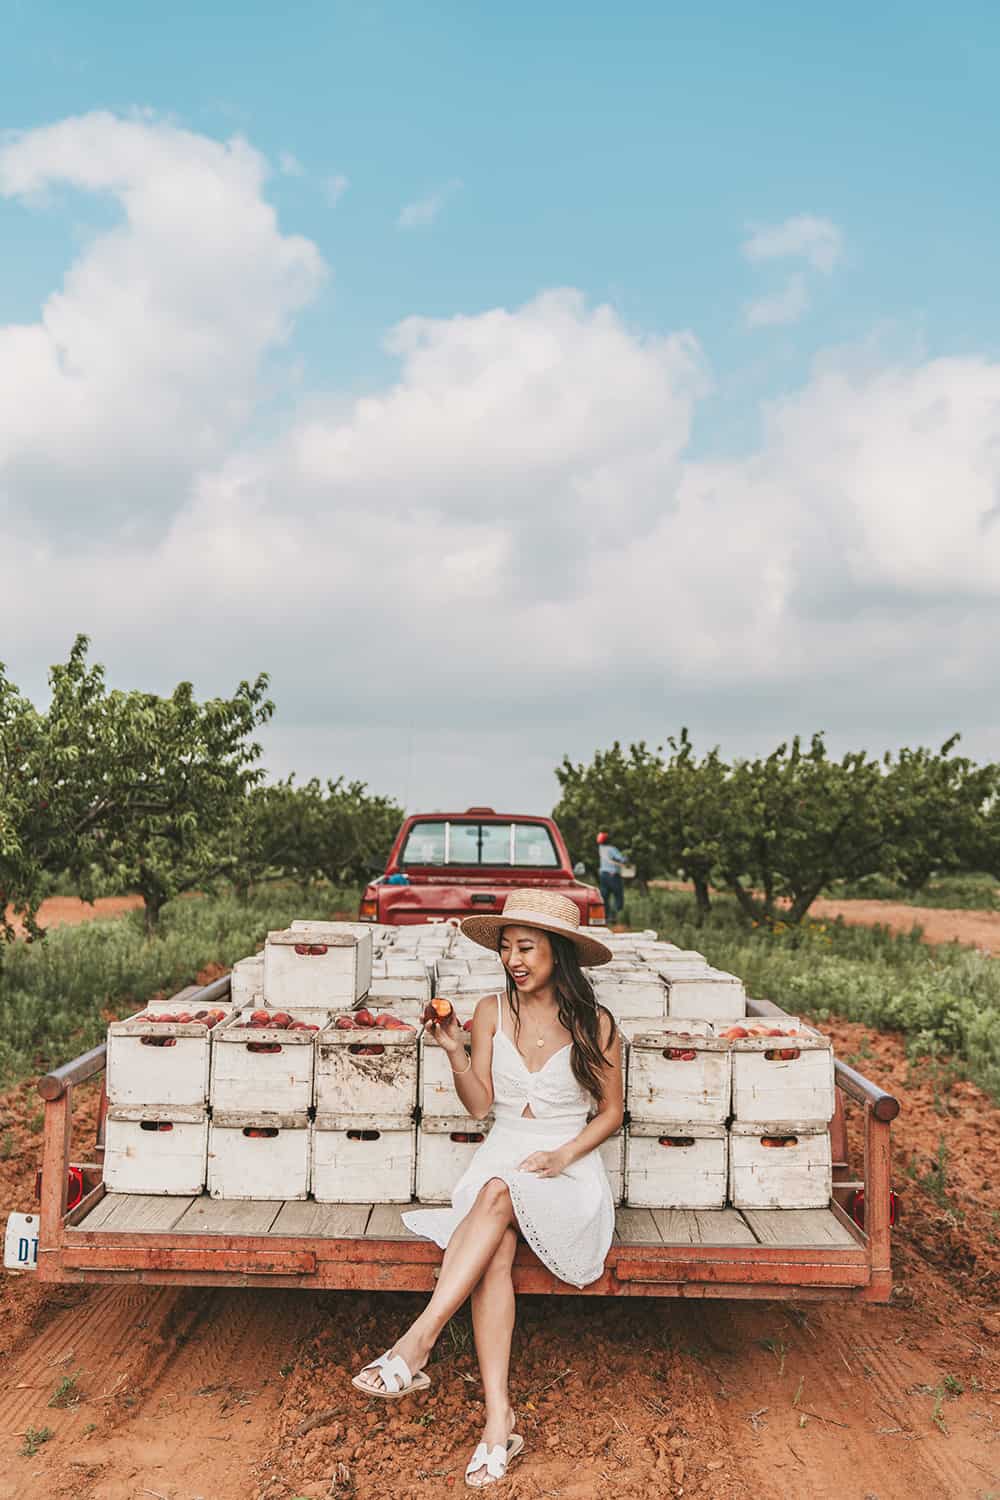 Peach orchard Gold Orchards in Stonewall Texas